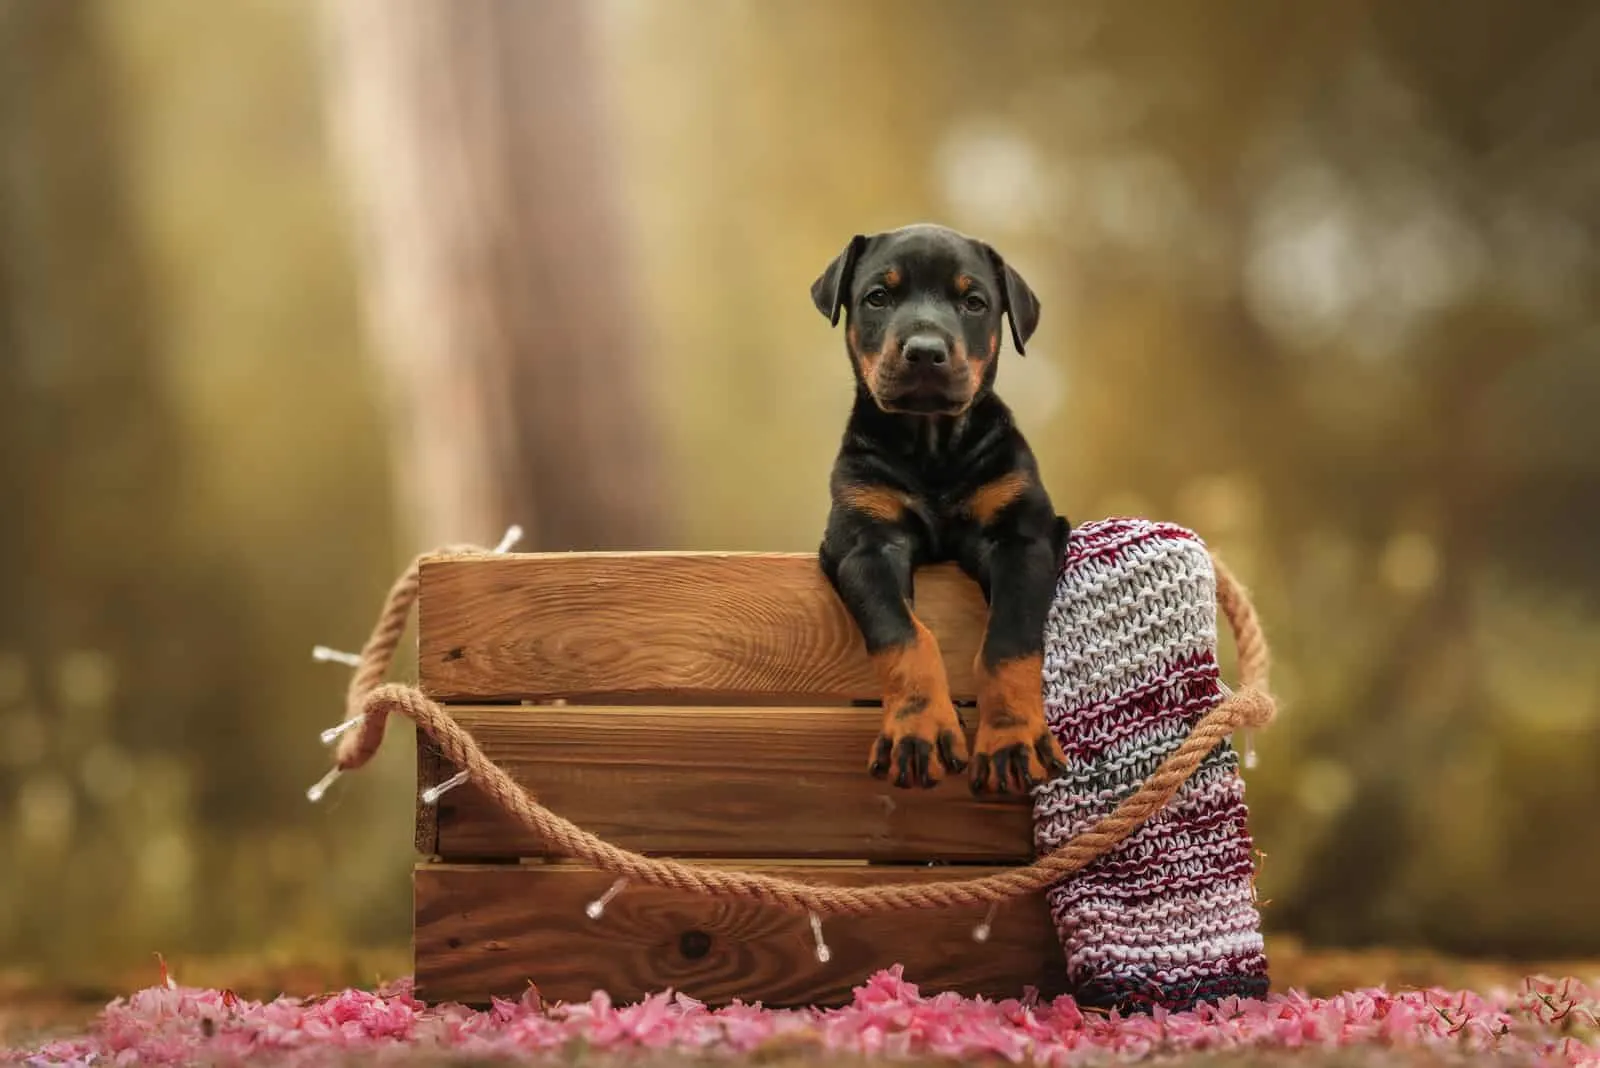 Doberman Puppies stand in a wooden box